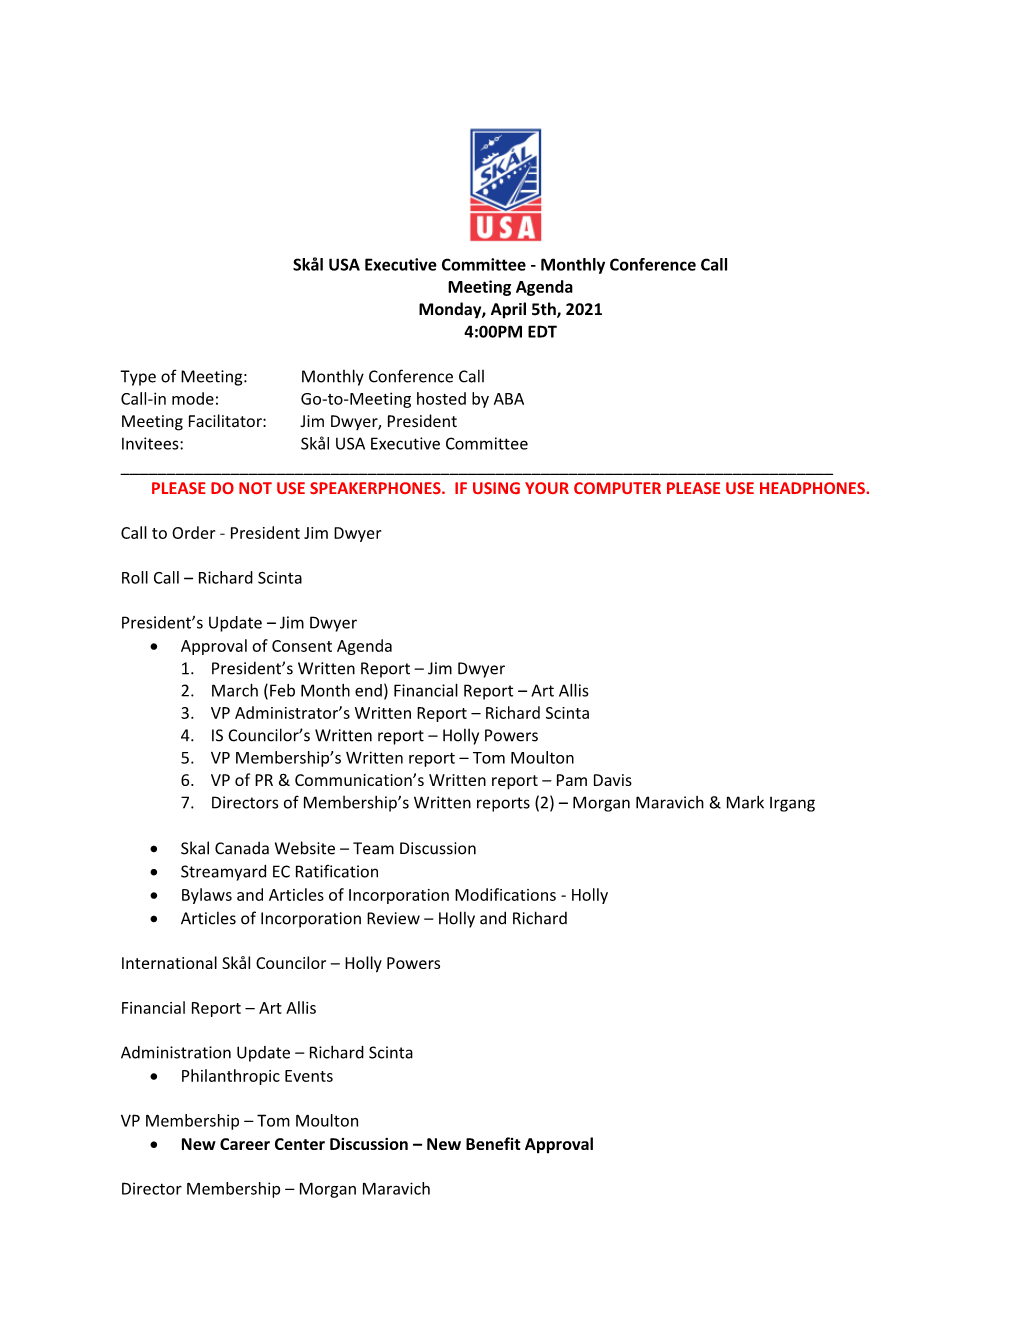 Skål USA Executive Committee - Monthly Conference Call Meeting Agenda Monday, April 5Th, 2021 4:00PM EDT